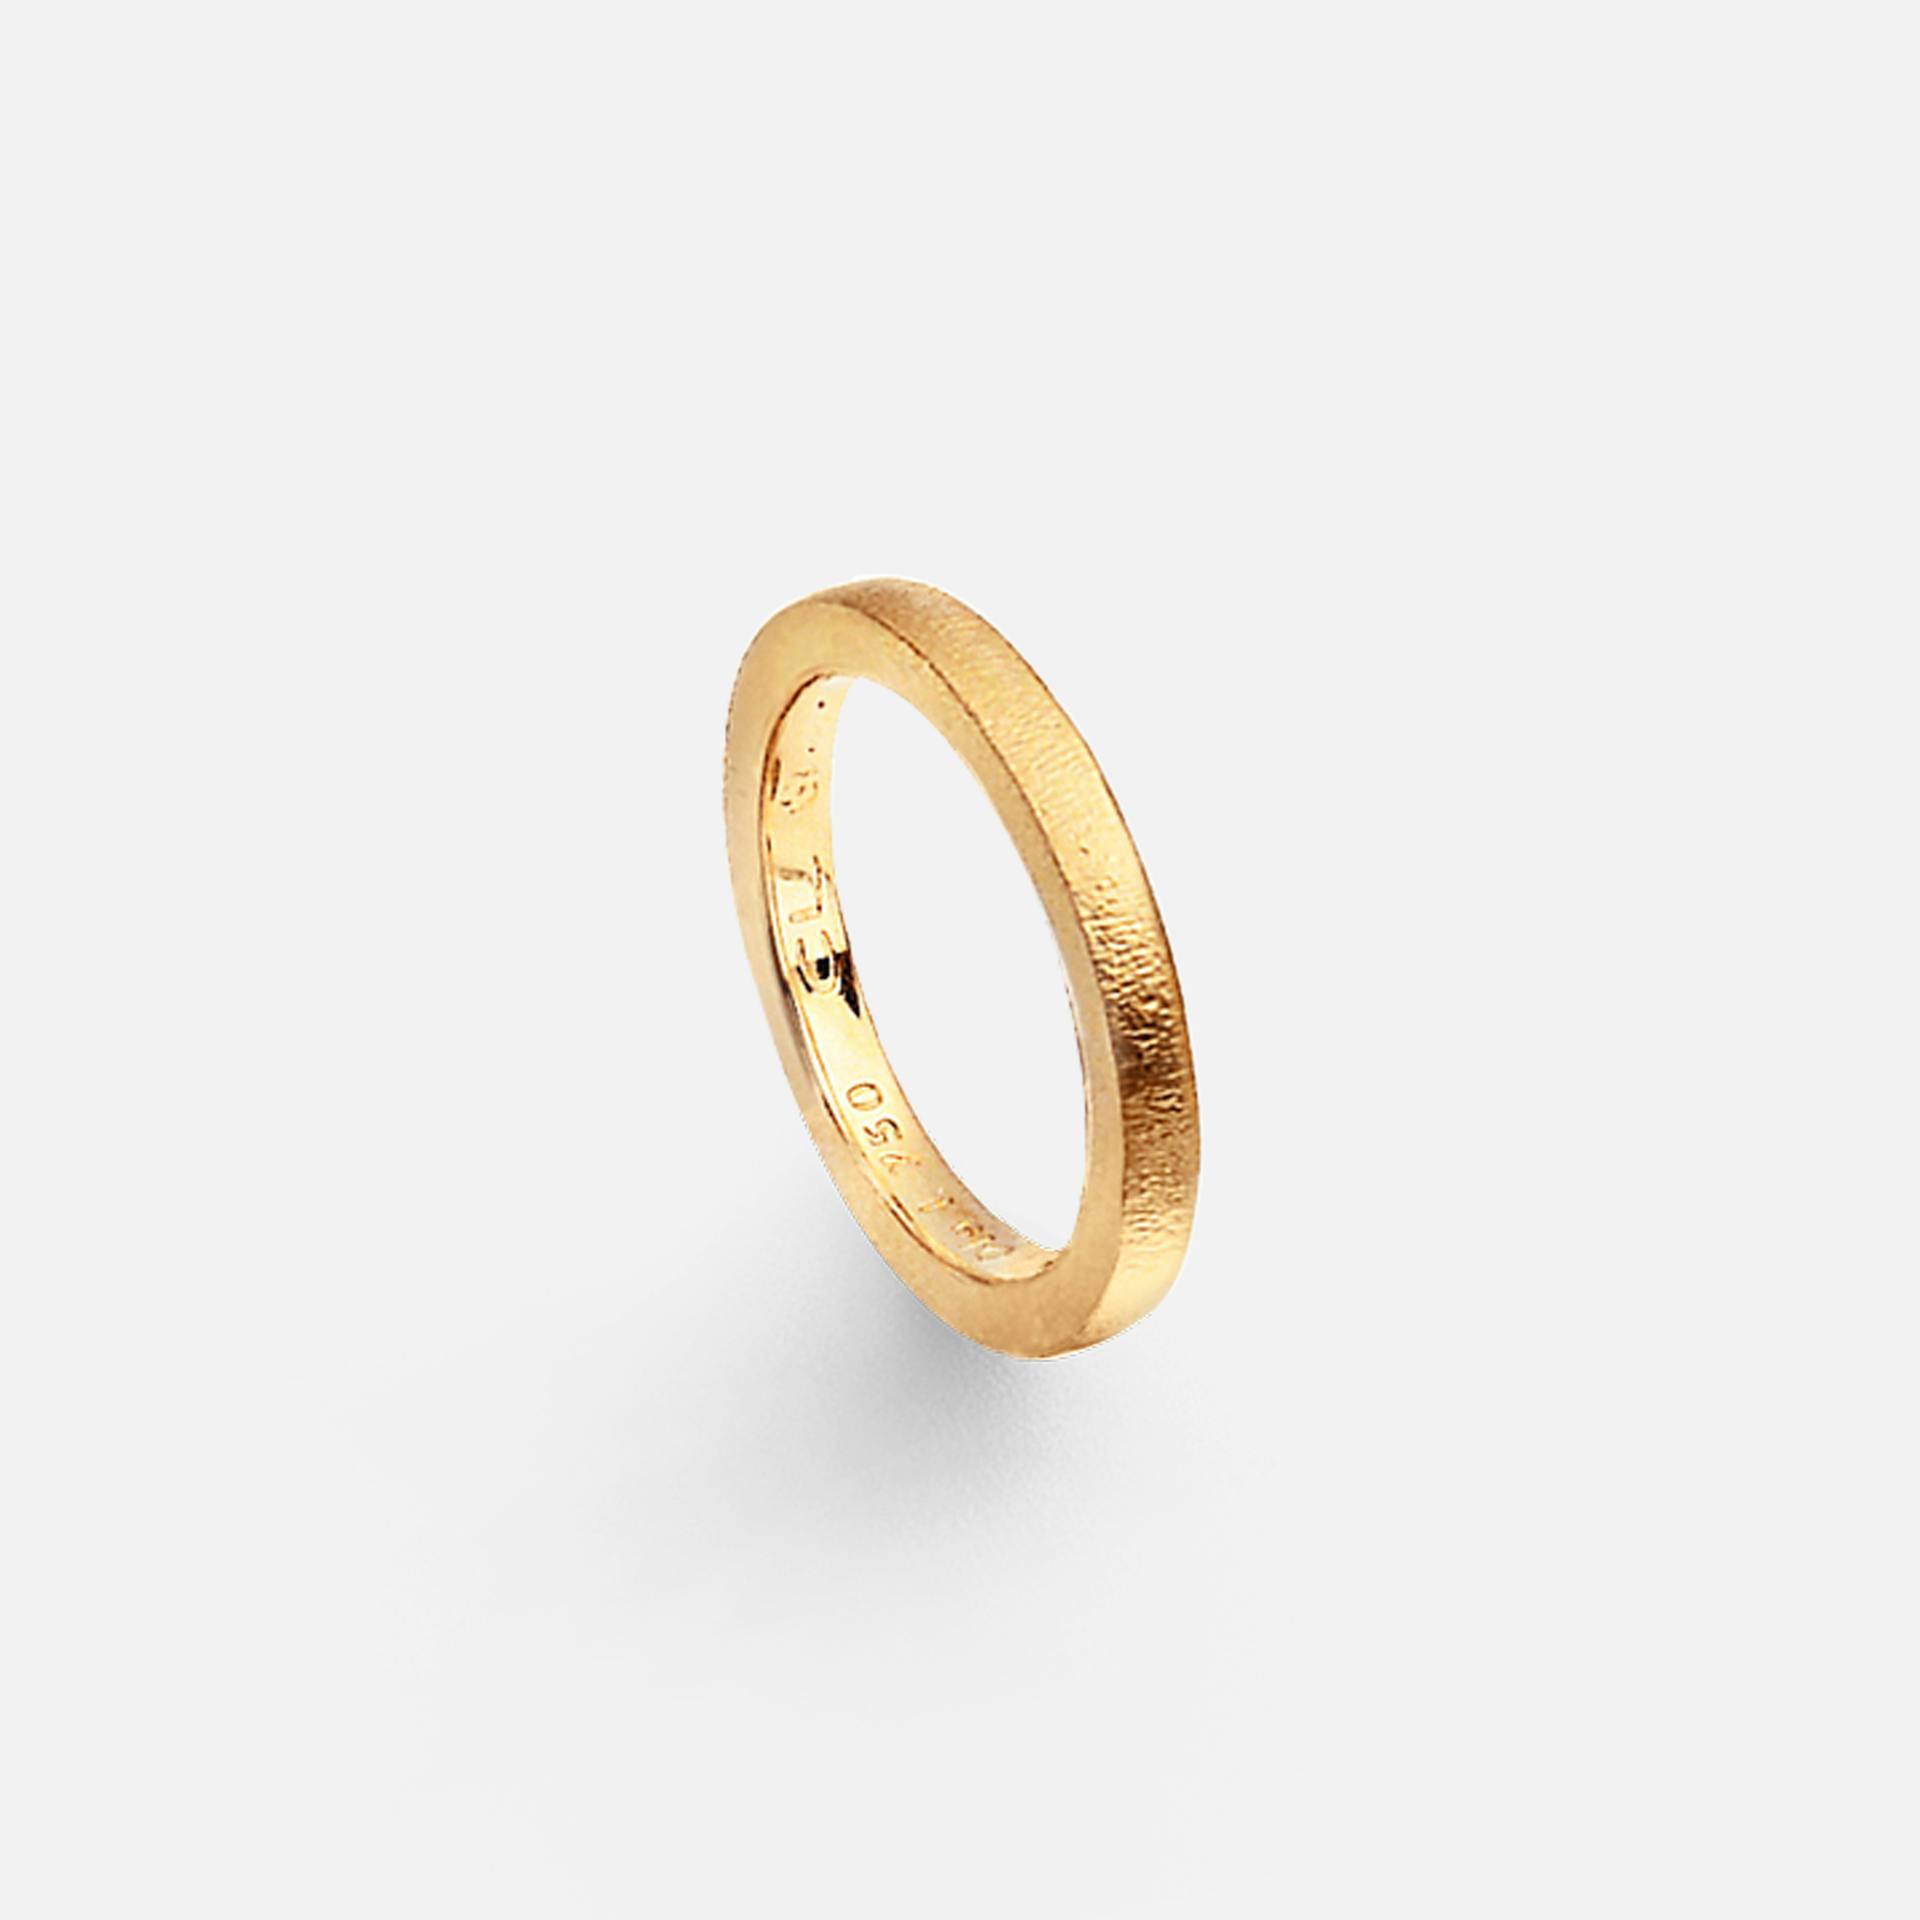 Forever Love Ring in Textured Yellow Gold  |  Ole Lynggaard Copenhagen